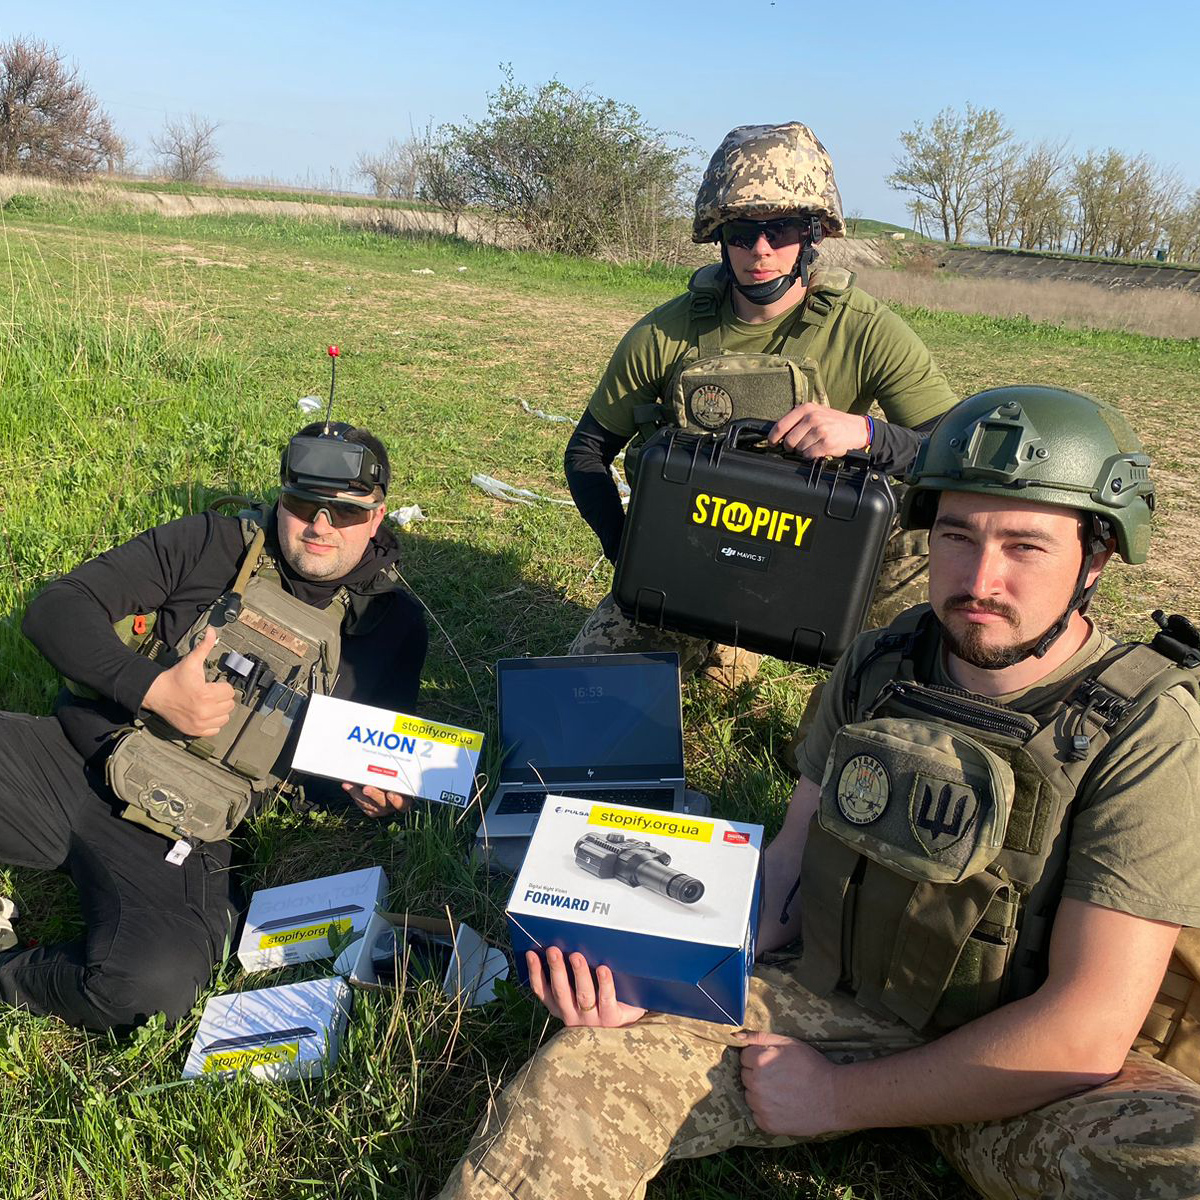 Hello from the 124th Territorial Defense Brigade🇺🇦 – the defenders send thanks to all our subscribers! #stopify #spreadtheword